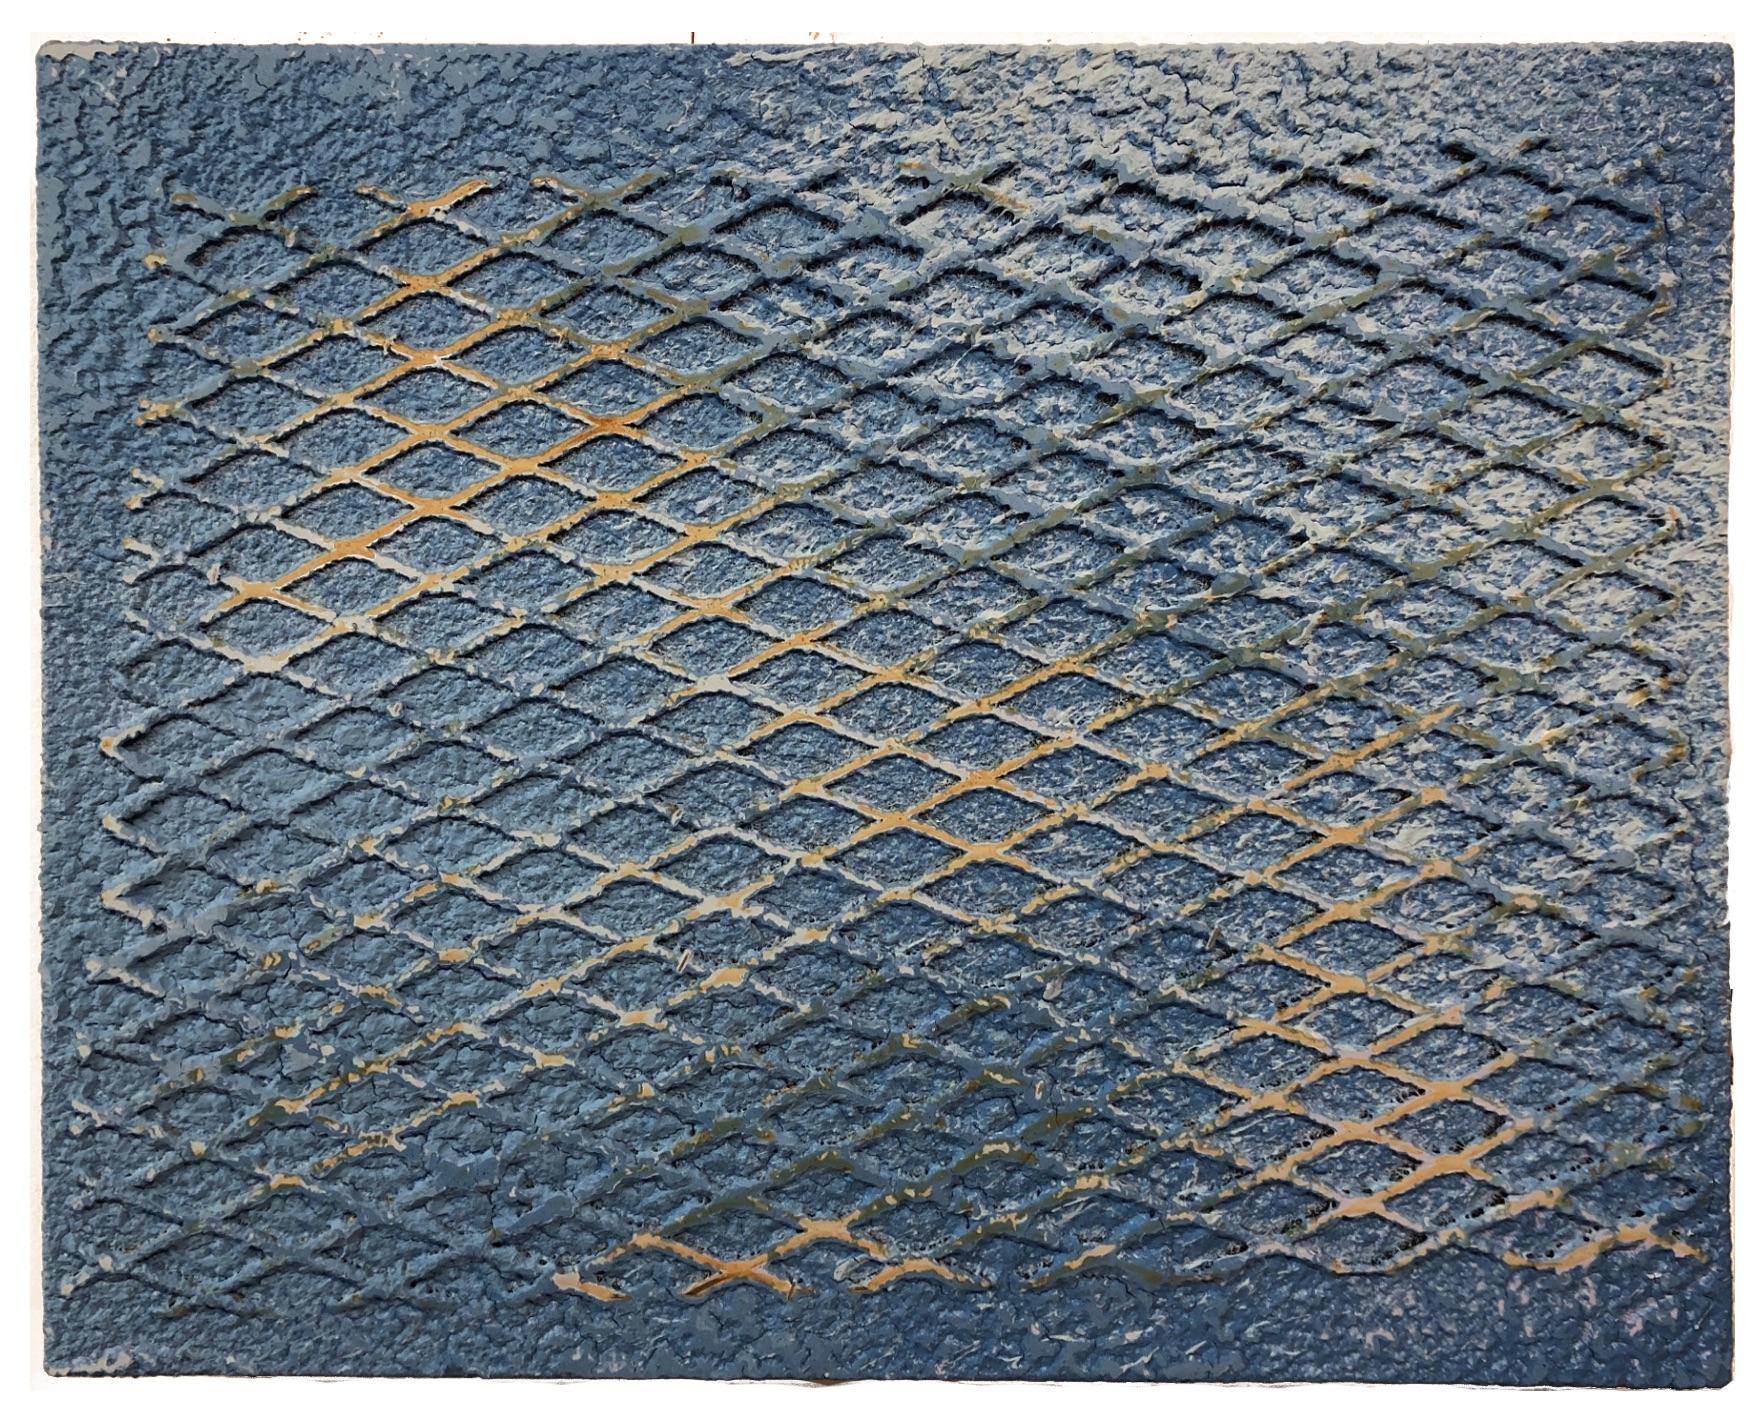 Deep blues in mesh, rust, textured patterns.  Hard Blue, mixed media by Joel Blenz
One of a kind ready to hang.  Signed by artist on verso.


ARTIST BIO 
A native of Queens, New York, Joel Blenz is a painter working in conversation with textured